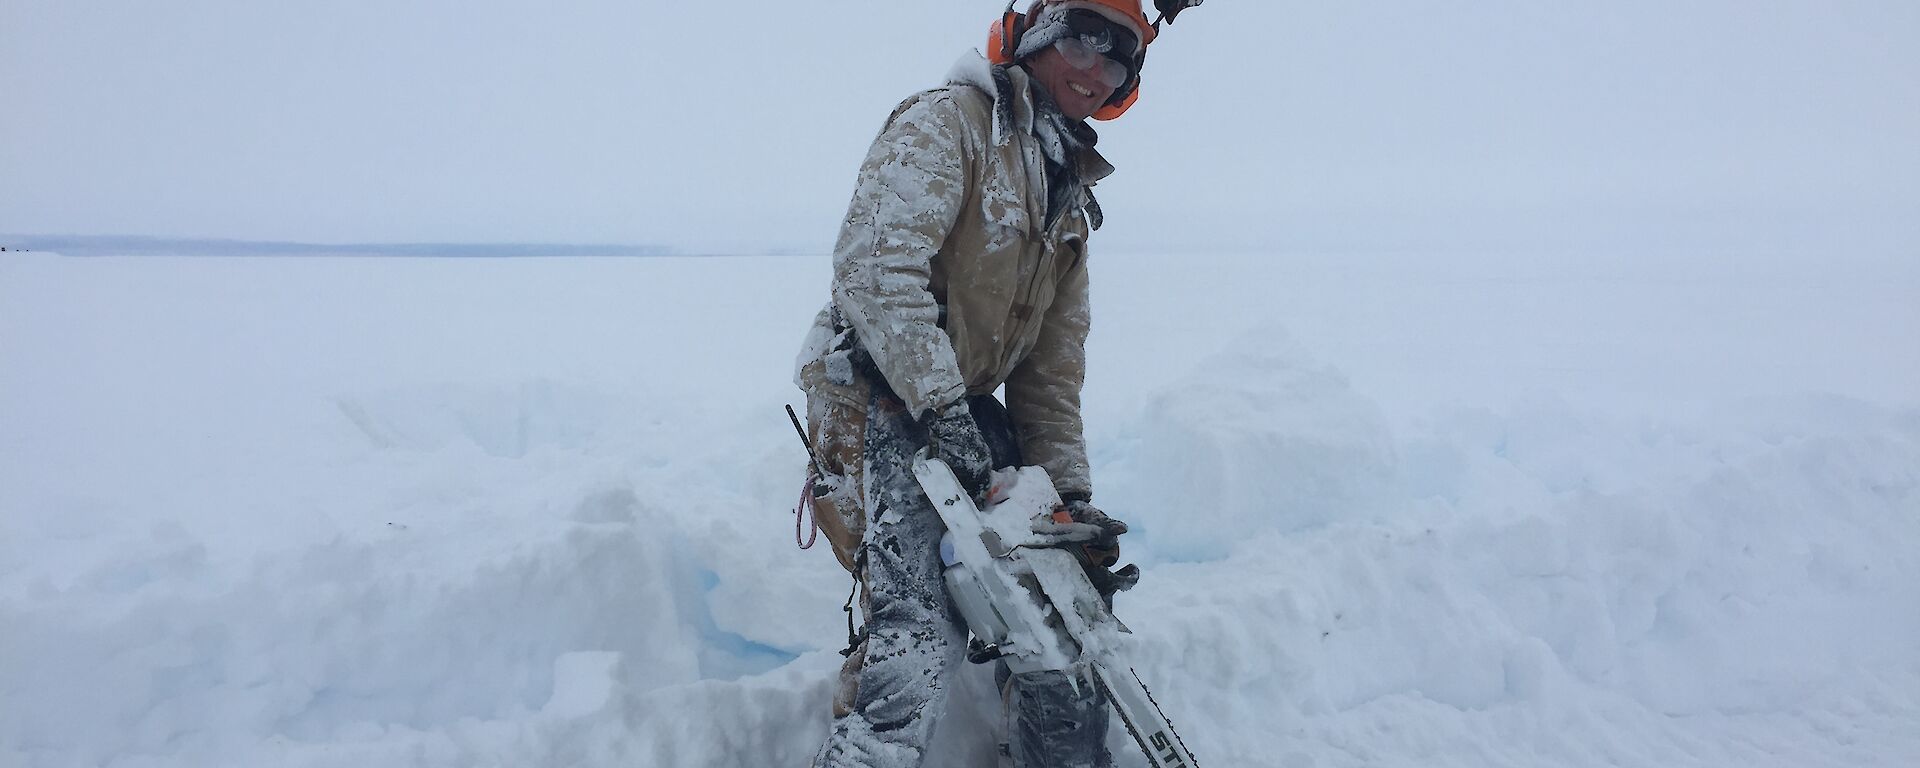 Conrad cutting into the ice with a chainsaw